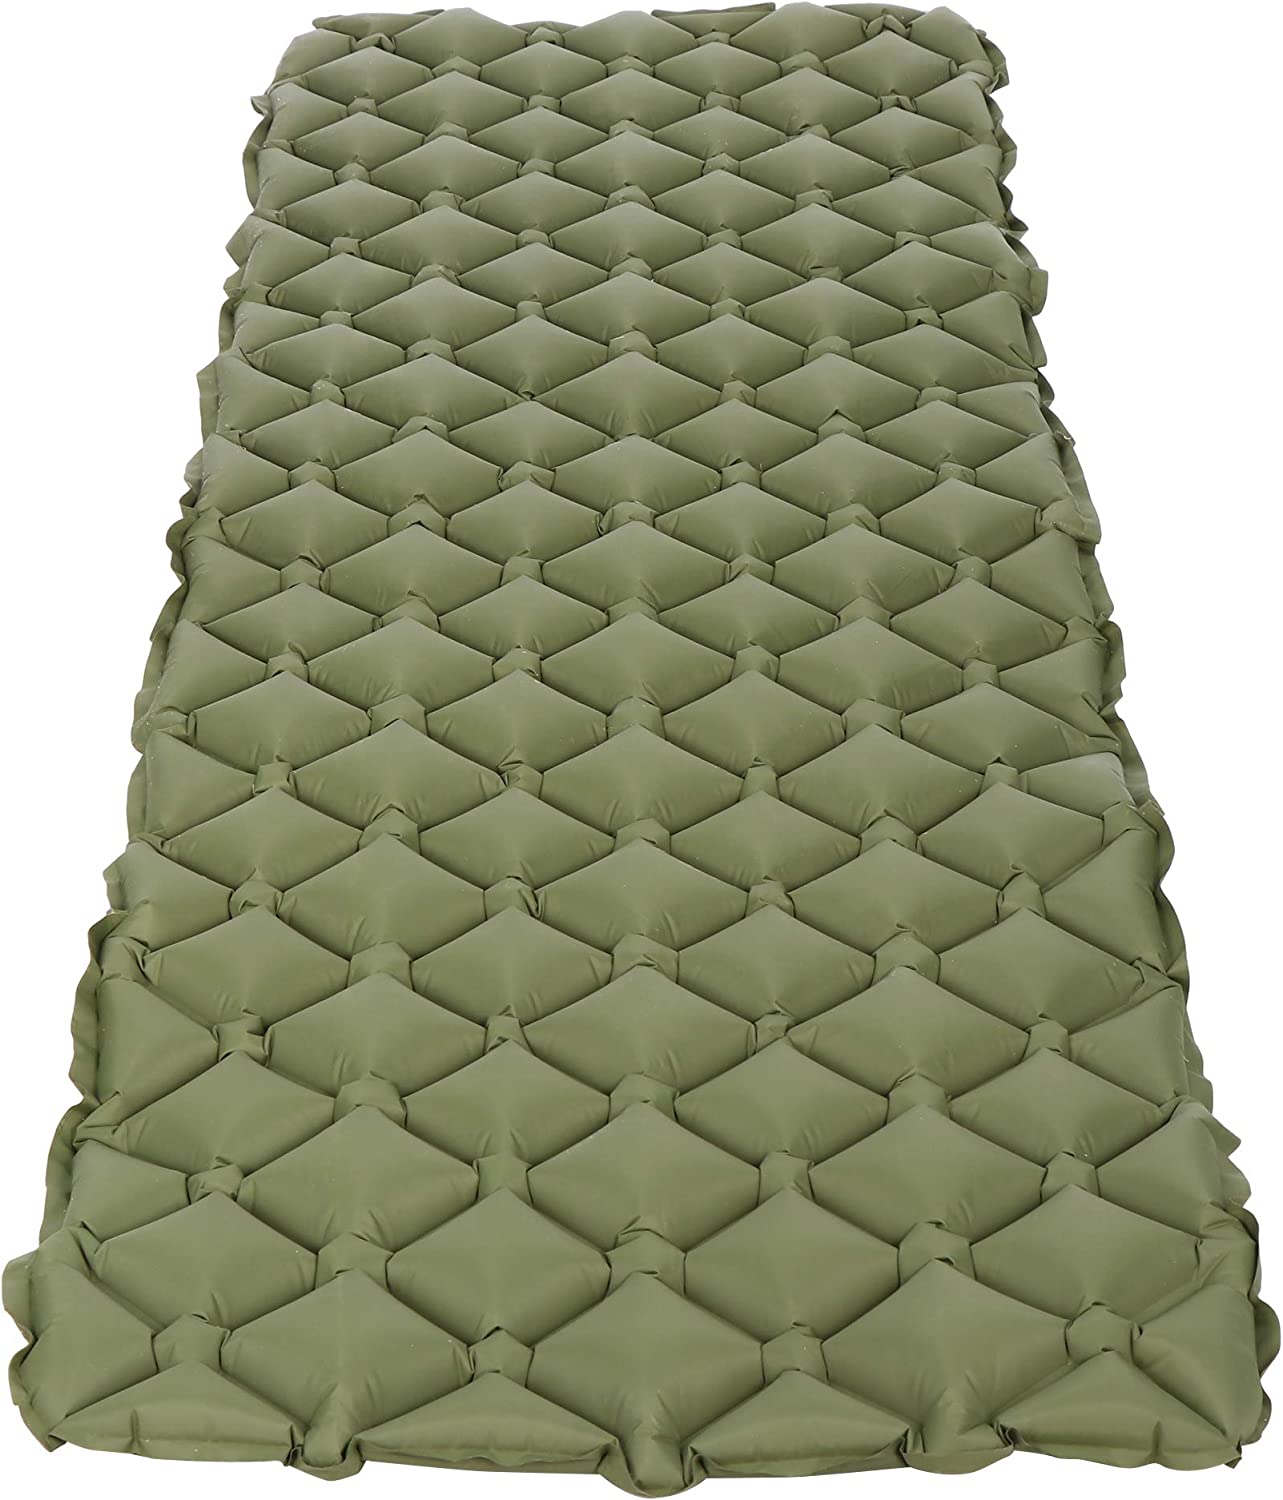 Sleeping Pad Mat Camping Pads Ultralight Inflatable Backpacking Pad Air Mattress for Camp Hikking Traveling Tent